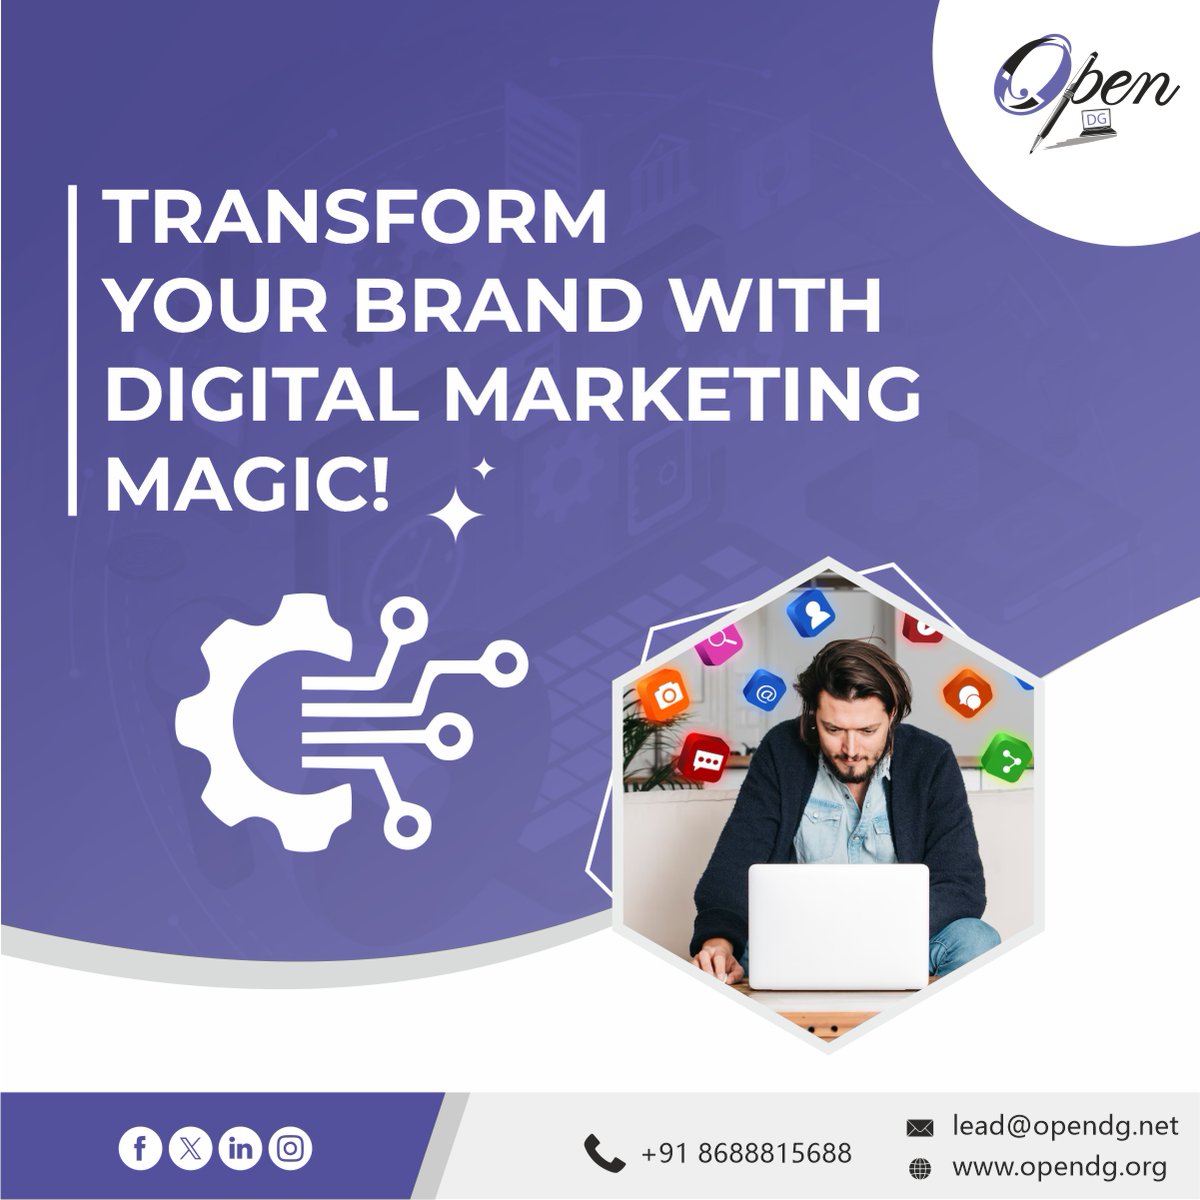 Let us help you unlock the full potential of your brand and captivate your audience like never before. #DigitalMarketing #BrandTransformation #MarketingMagic #Innovation #Success